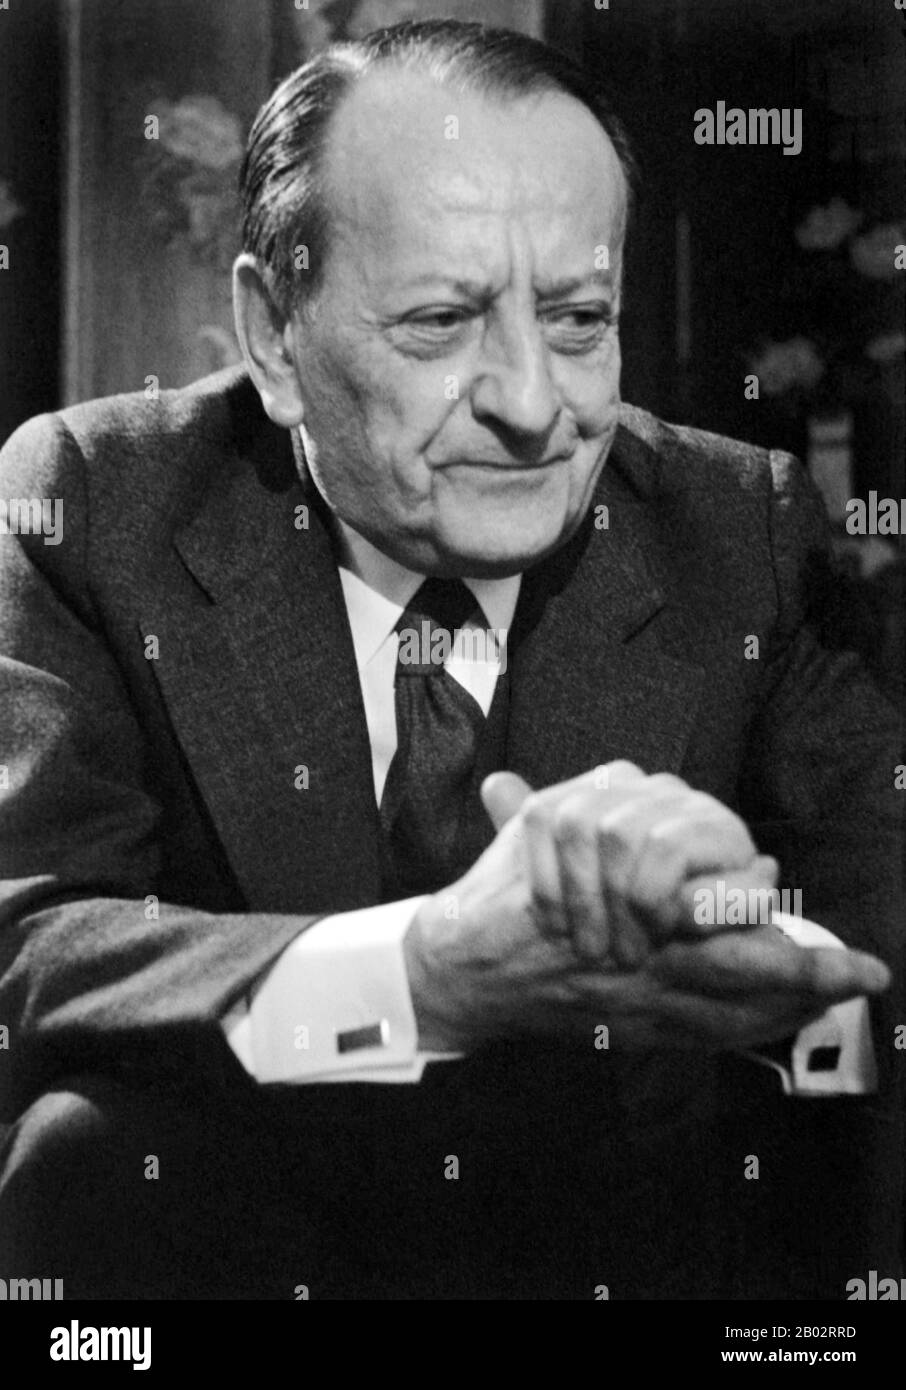 André Malraux DSO (3 November 1901 – 23 November 1976) was a French novelist, art theorist and Minister for Cultural Affairs. Malraux's novel La Condition Humaine (Man's Fate) (1933) won the Prix Goncourt. He was appointed by President Charles de Gaulle as Minister of Information (1945–1946) and subsequently as France's first Minister of Cultural Affairs during de Gaulle's presidency (1959–1969).  In 1923 Malraux undertook a small expedition into unexplored areas of the Cambodian jungle in search of lost Khmer temples, hoping to recover items that might be sold to art museums. On his return, h Stock Photo